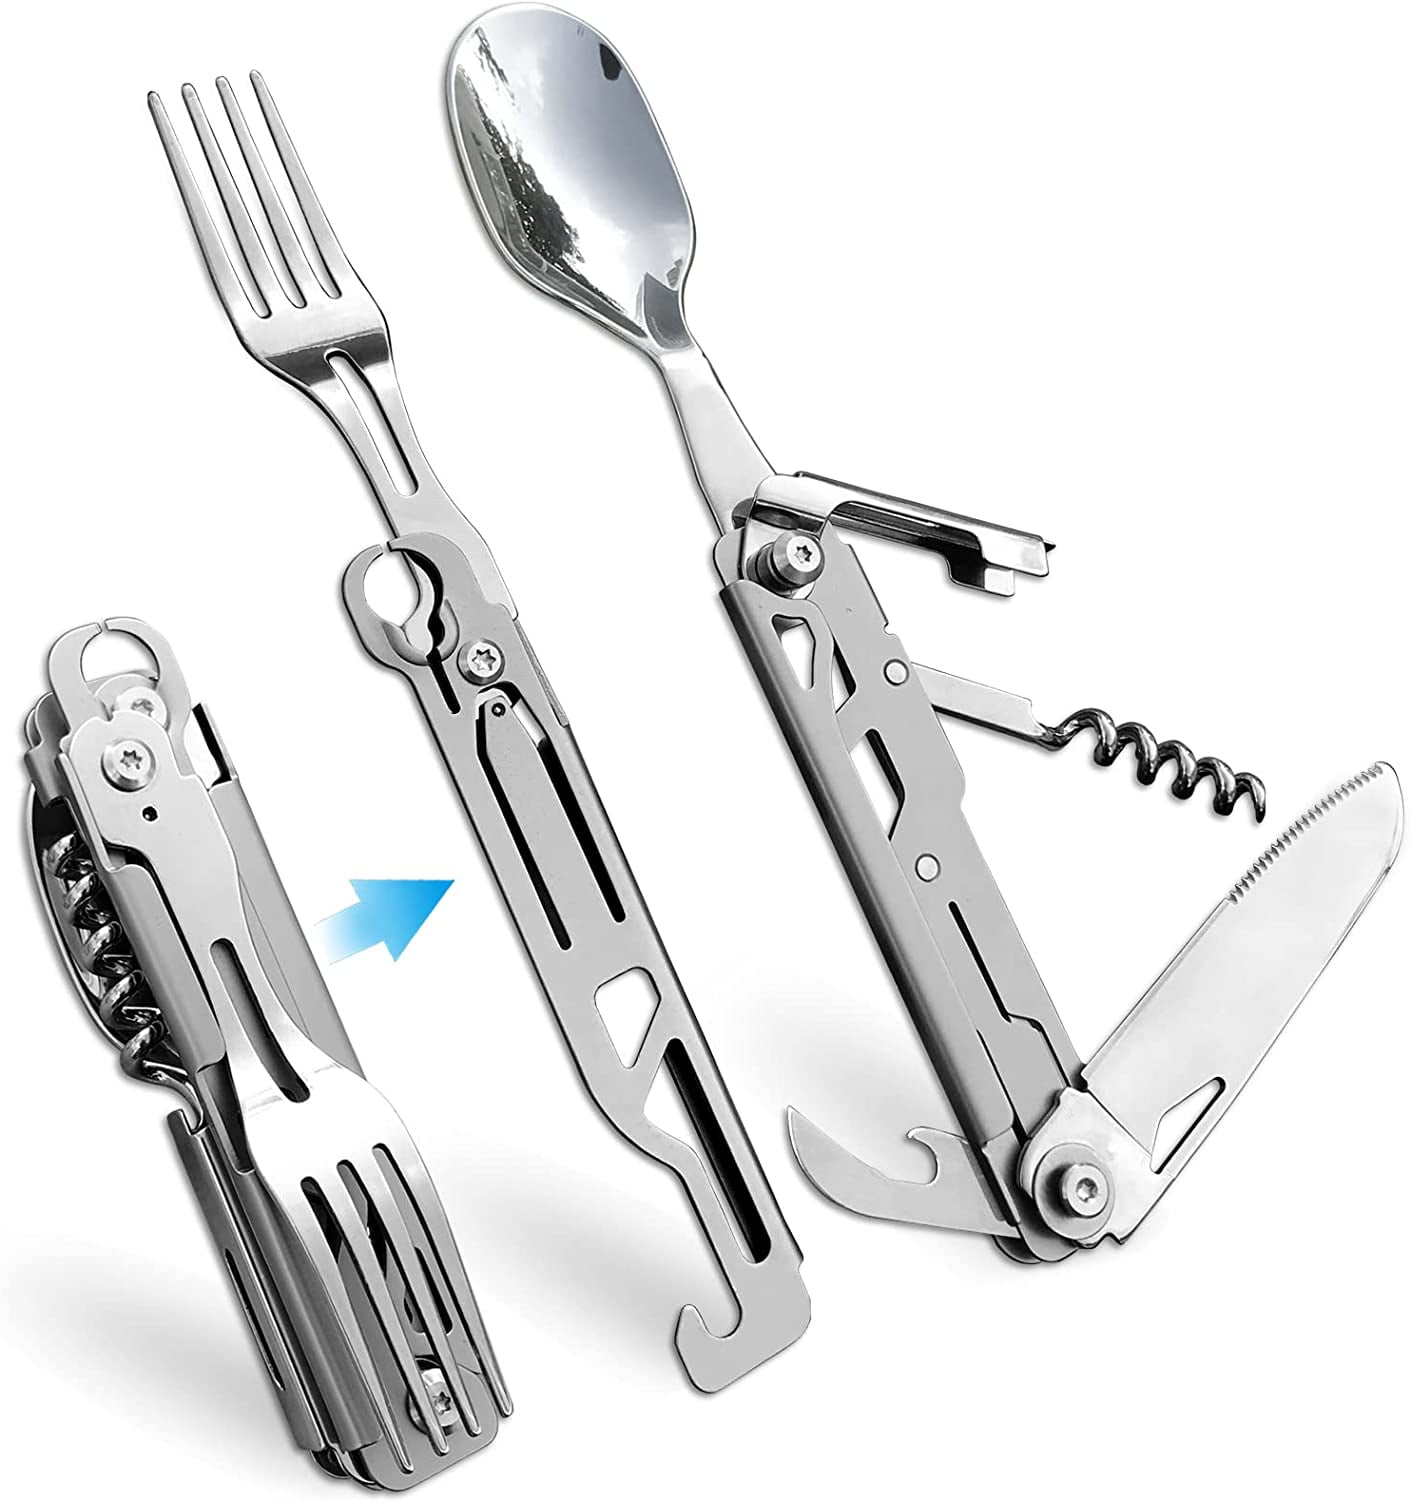 Polished Stainless Steel Multi-Purpose Opener Foldable Mini Portable for Kitchen Camping Opener Can Travel